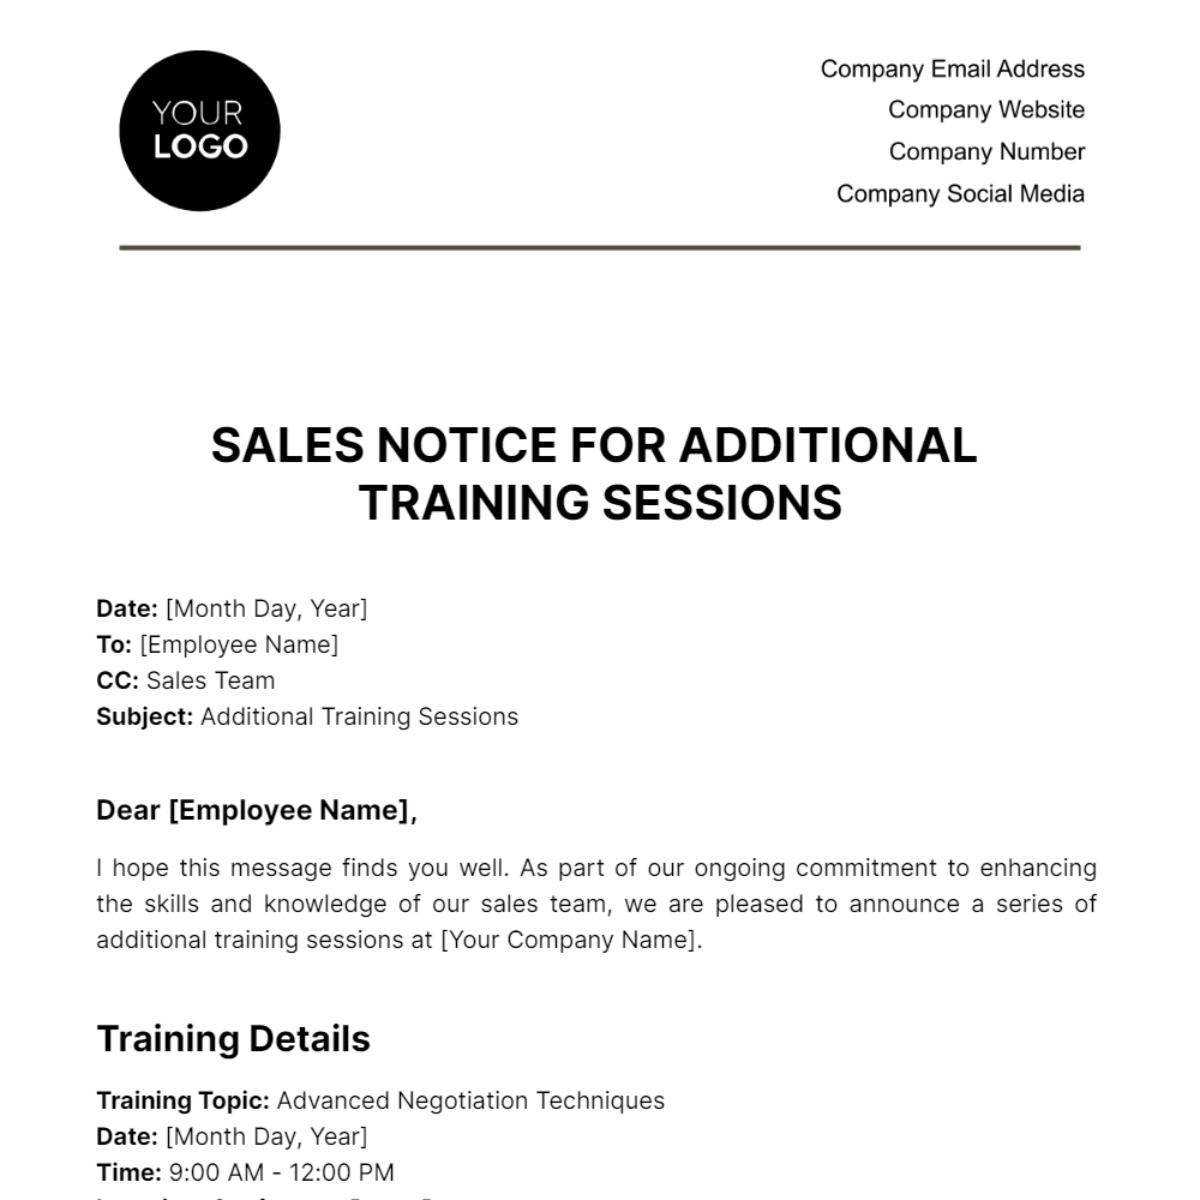 Sales Notice for Additional Training Sessions Template